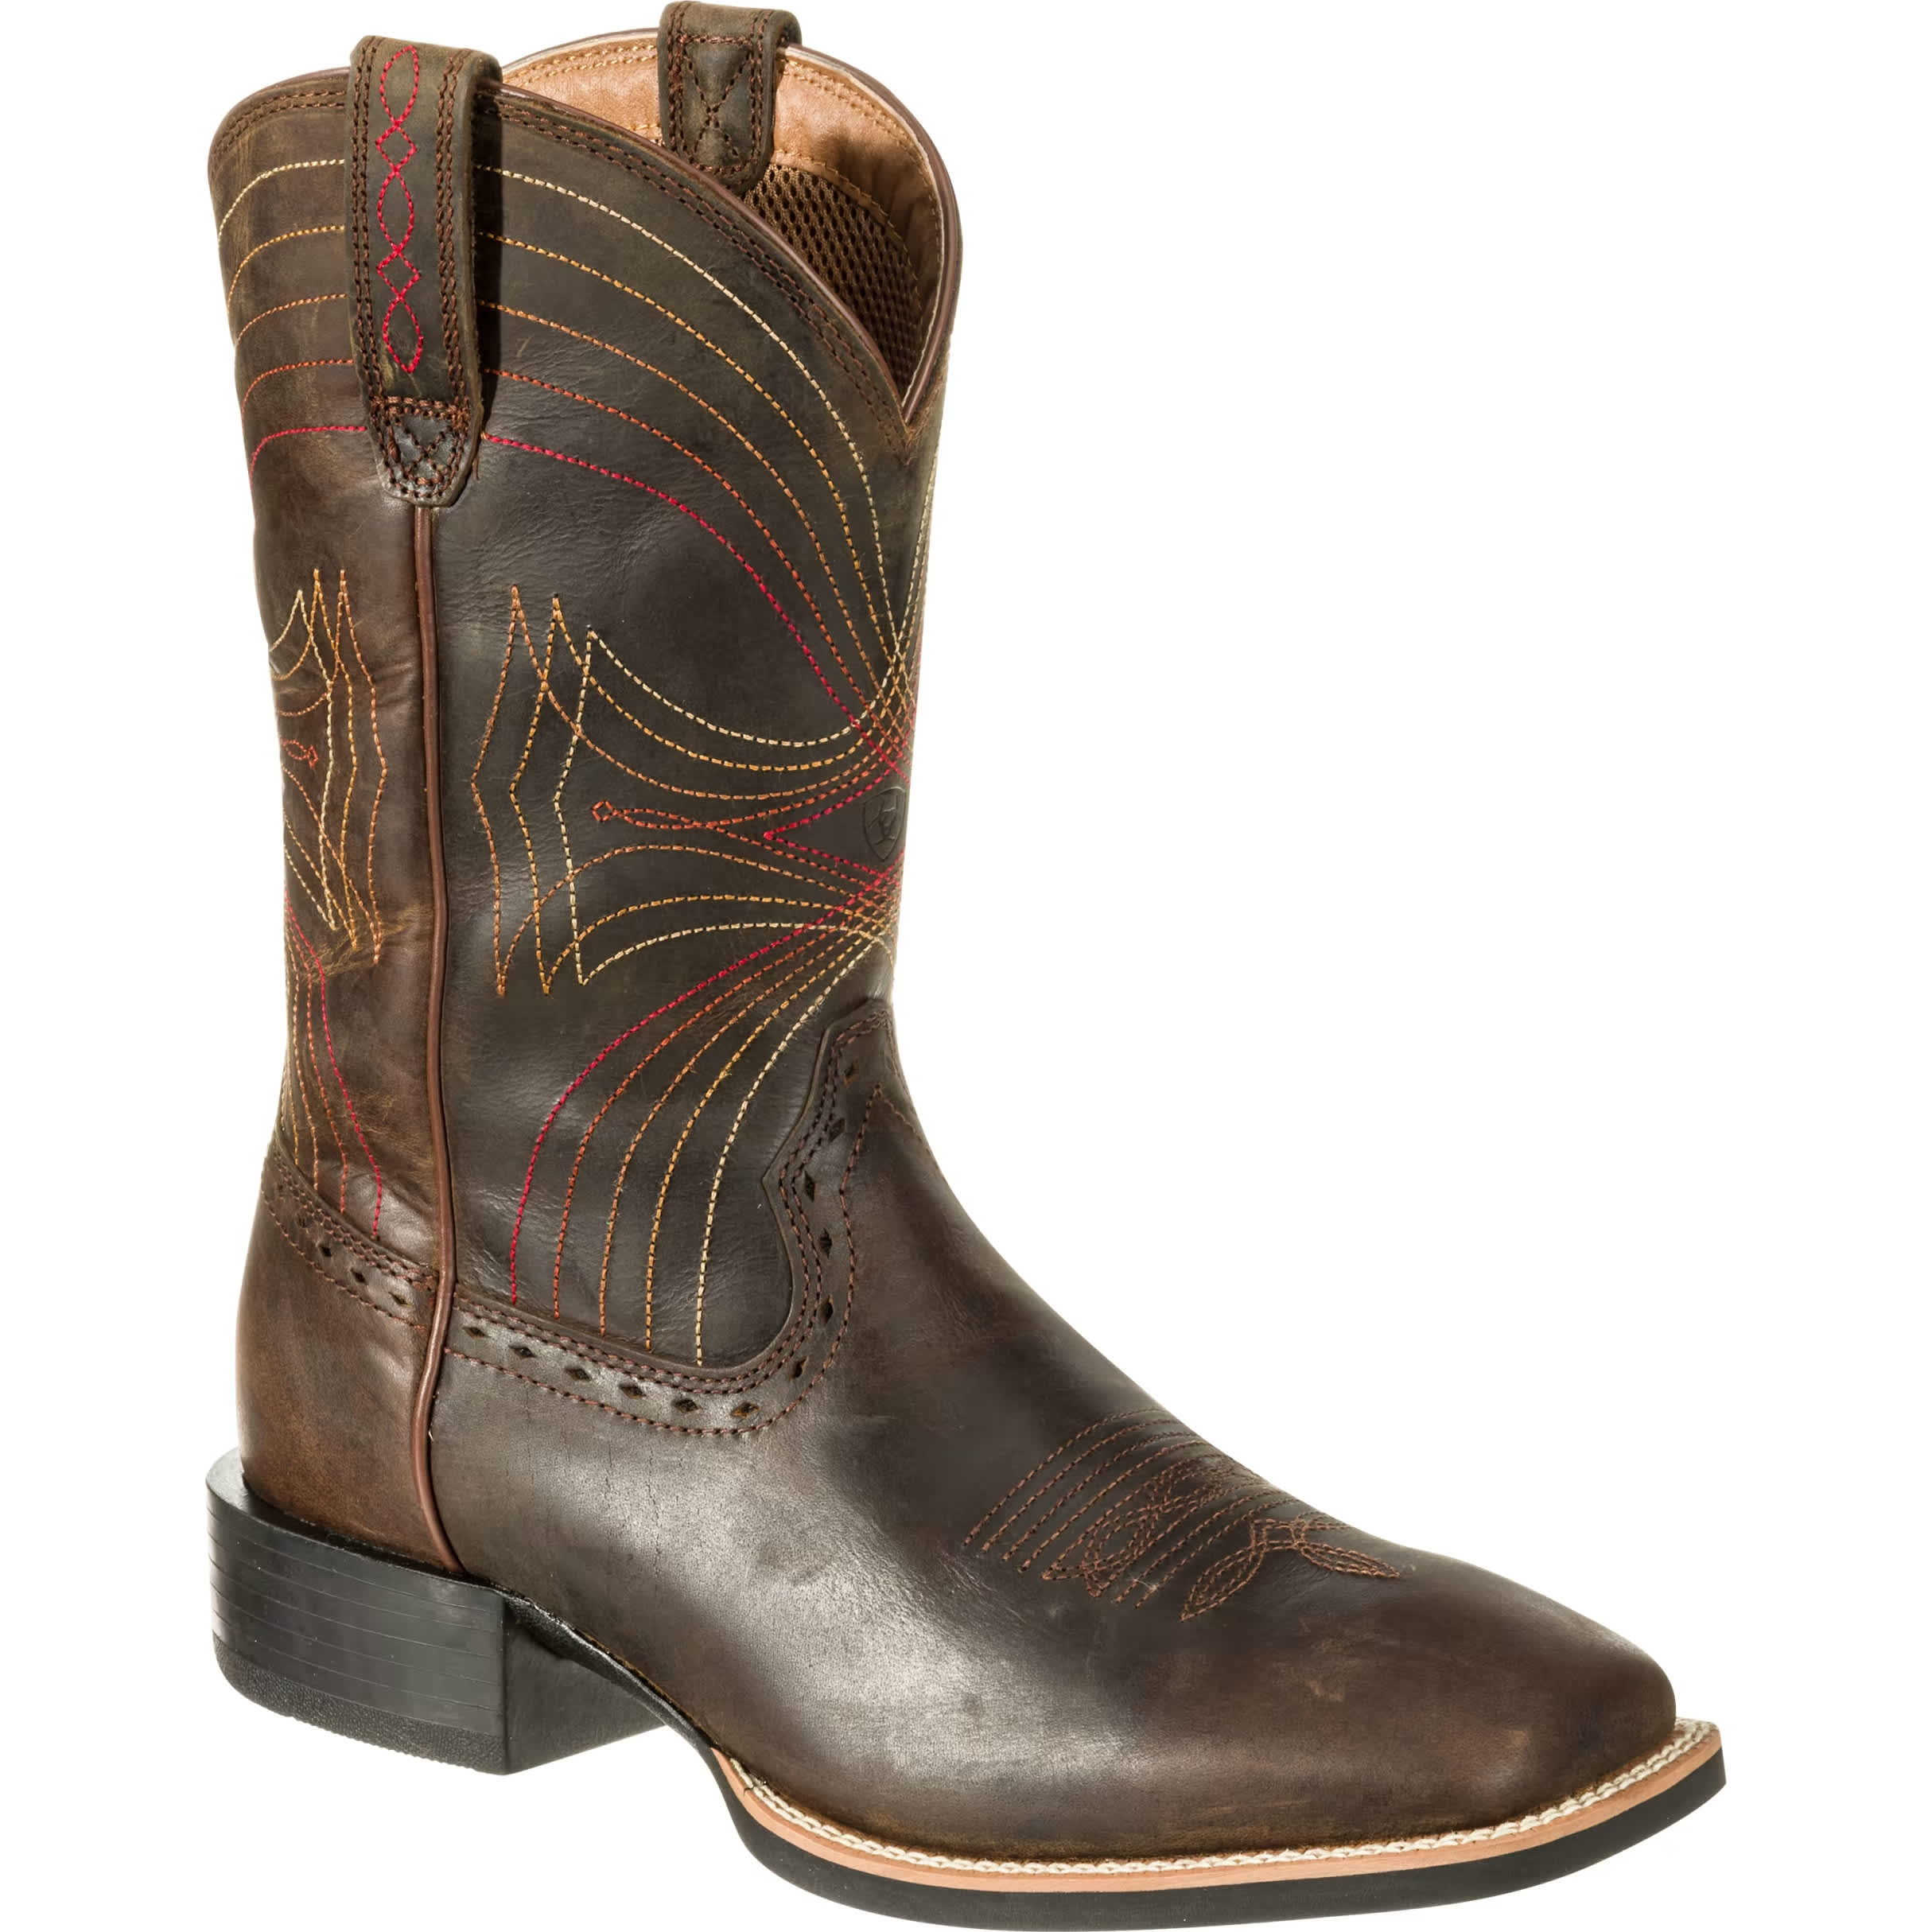 Ariat® Men's Sport Wide Square Toe Western Boots